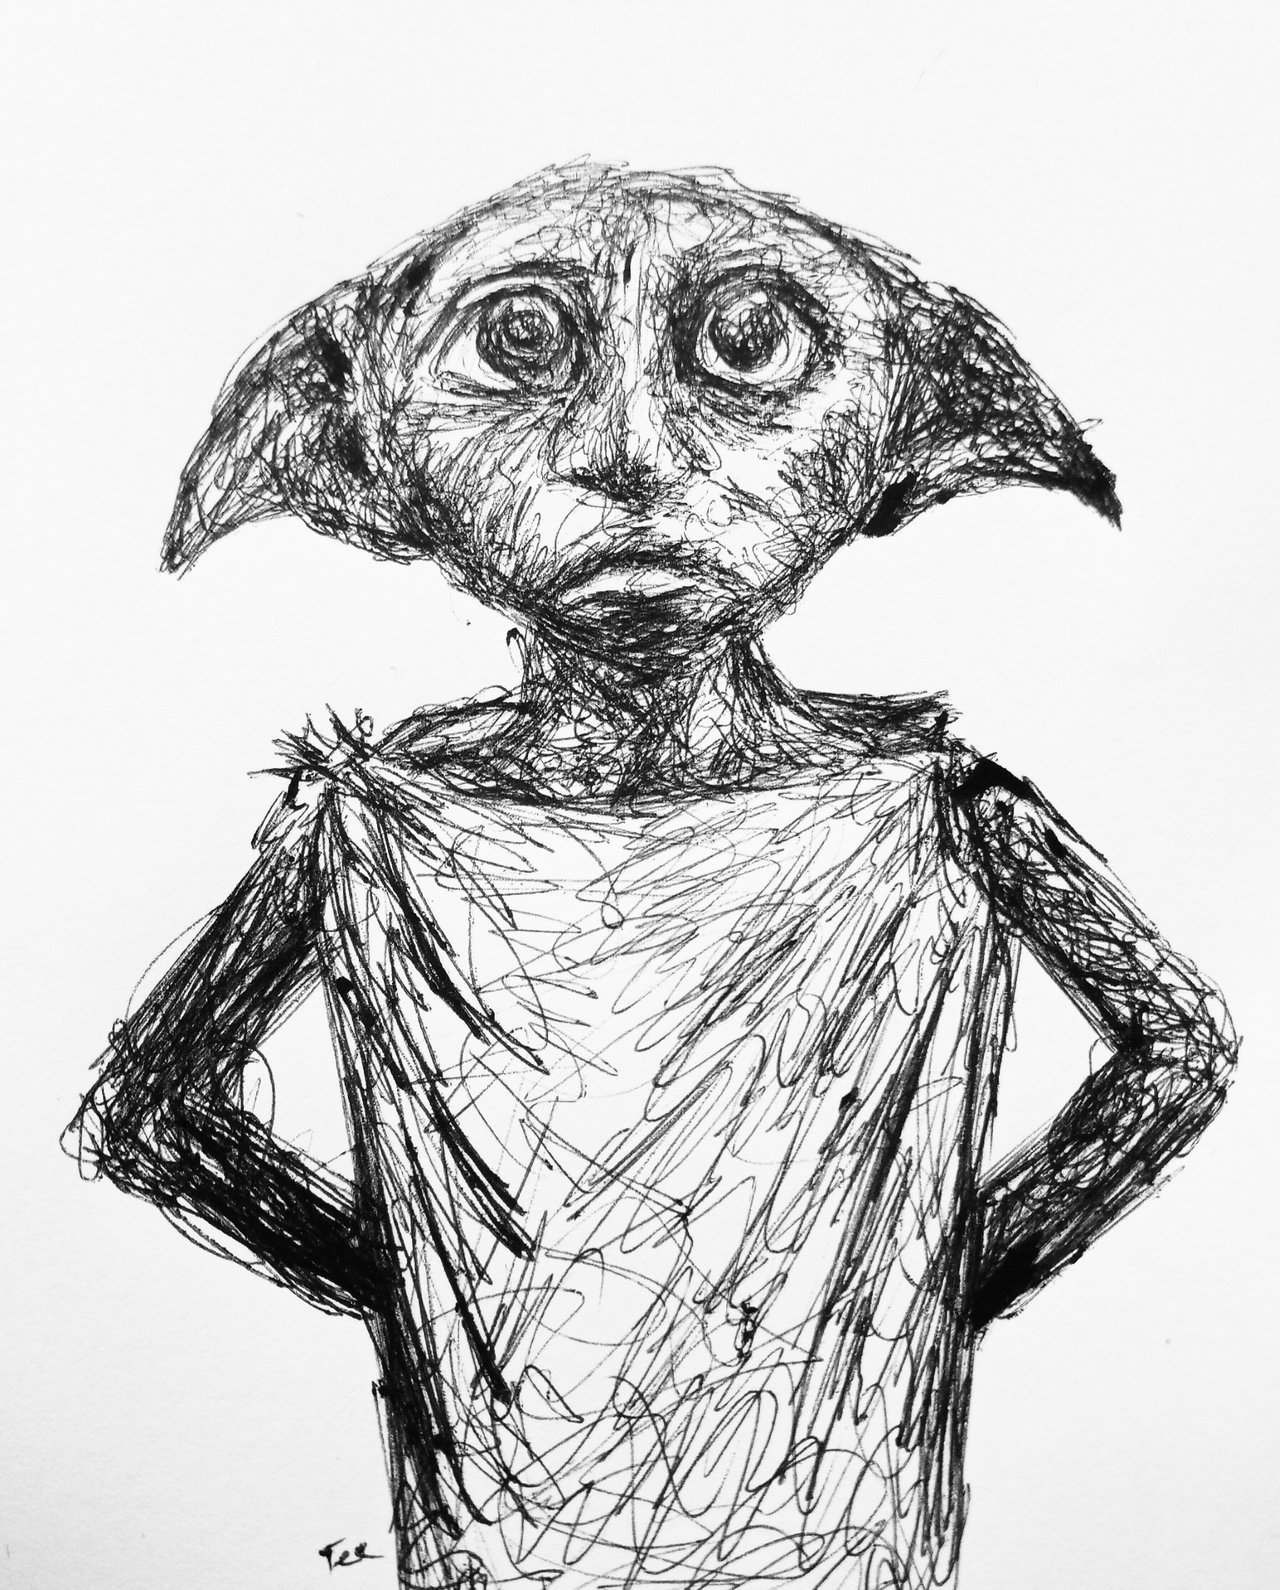 Ink Addicted tattoos  Dobby Harry Potter character pencil sketch work by  sketch13 and yogo18 sketch sketches sketching sketchingart  sketchesoninstagram sketches sketch13 yogo18sketchaday sketchart  sketchtime art artwork artist 